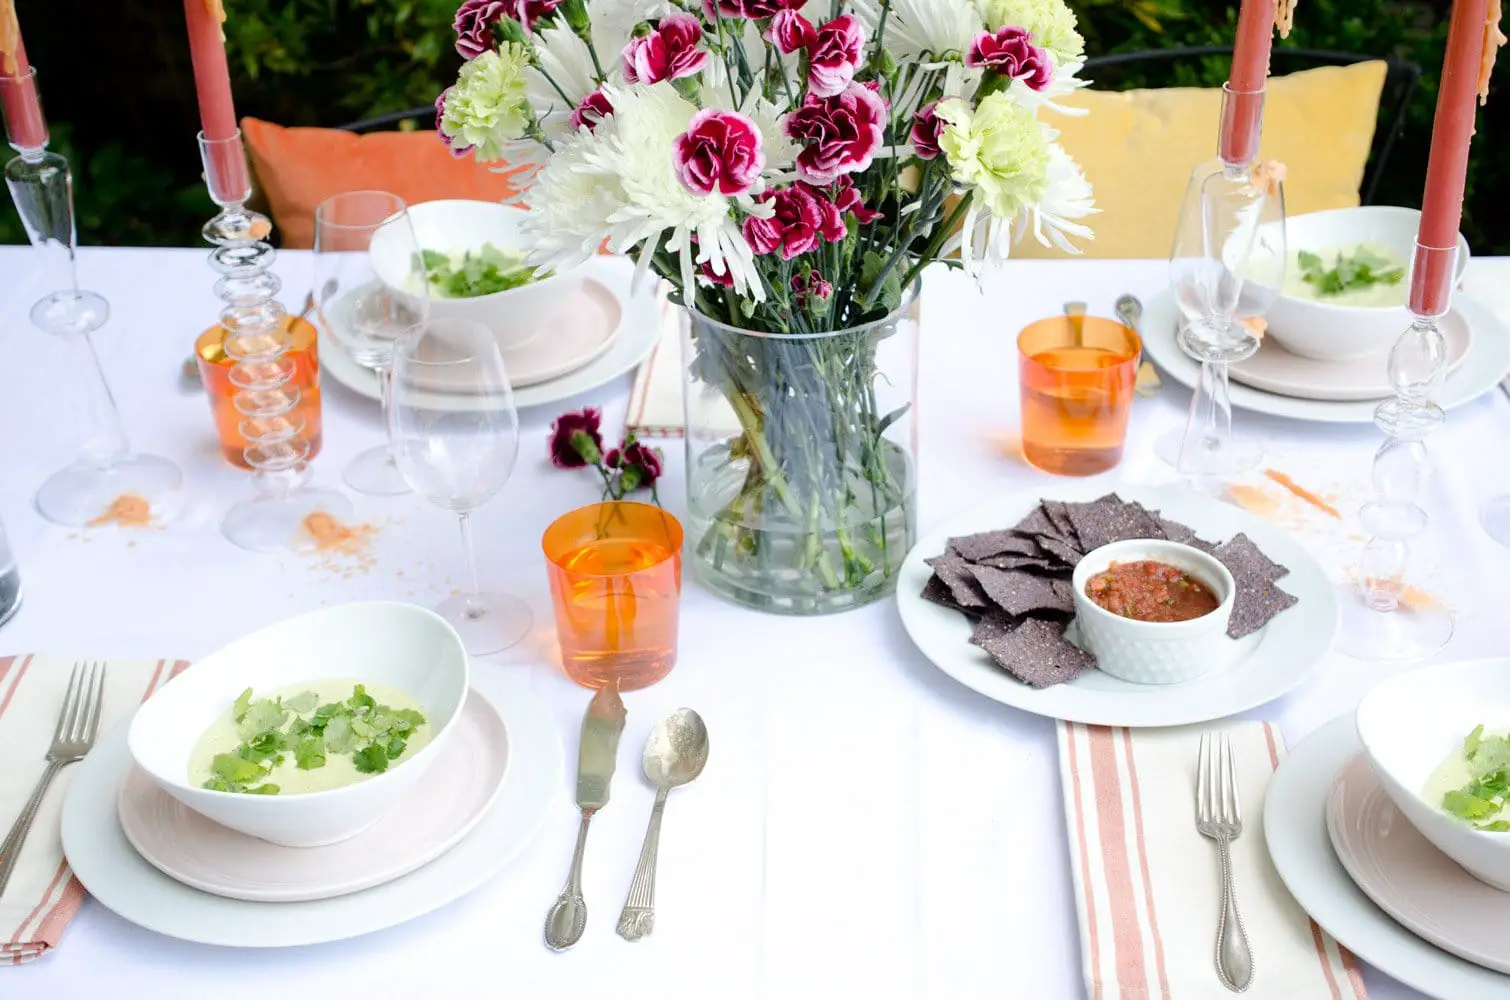 Brighten up your Cinco de Mayo tabletop with pops of orange, yellow and blush, and bring in colored water glasses and striped napkins for some pizazz.